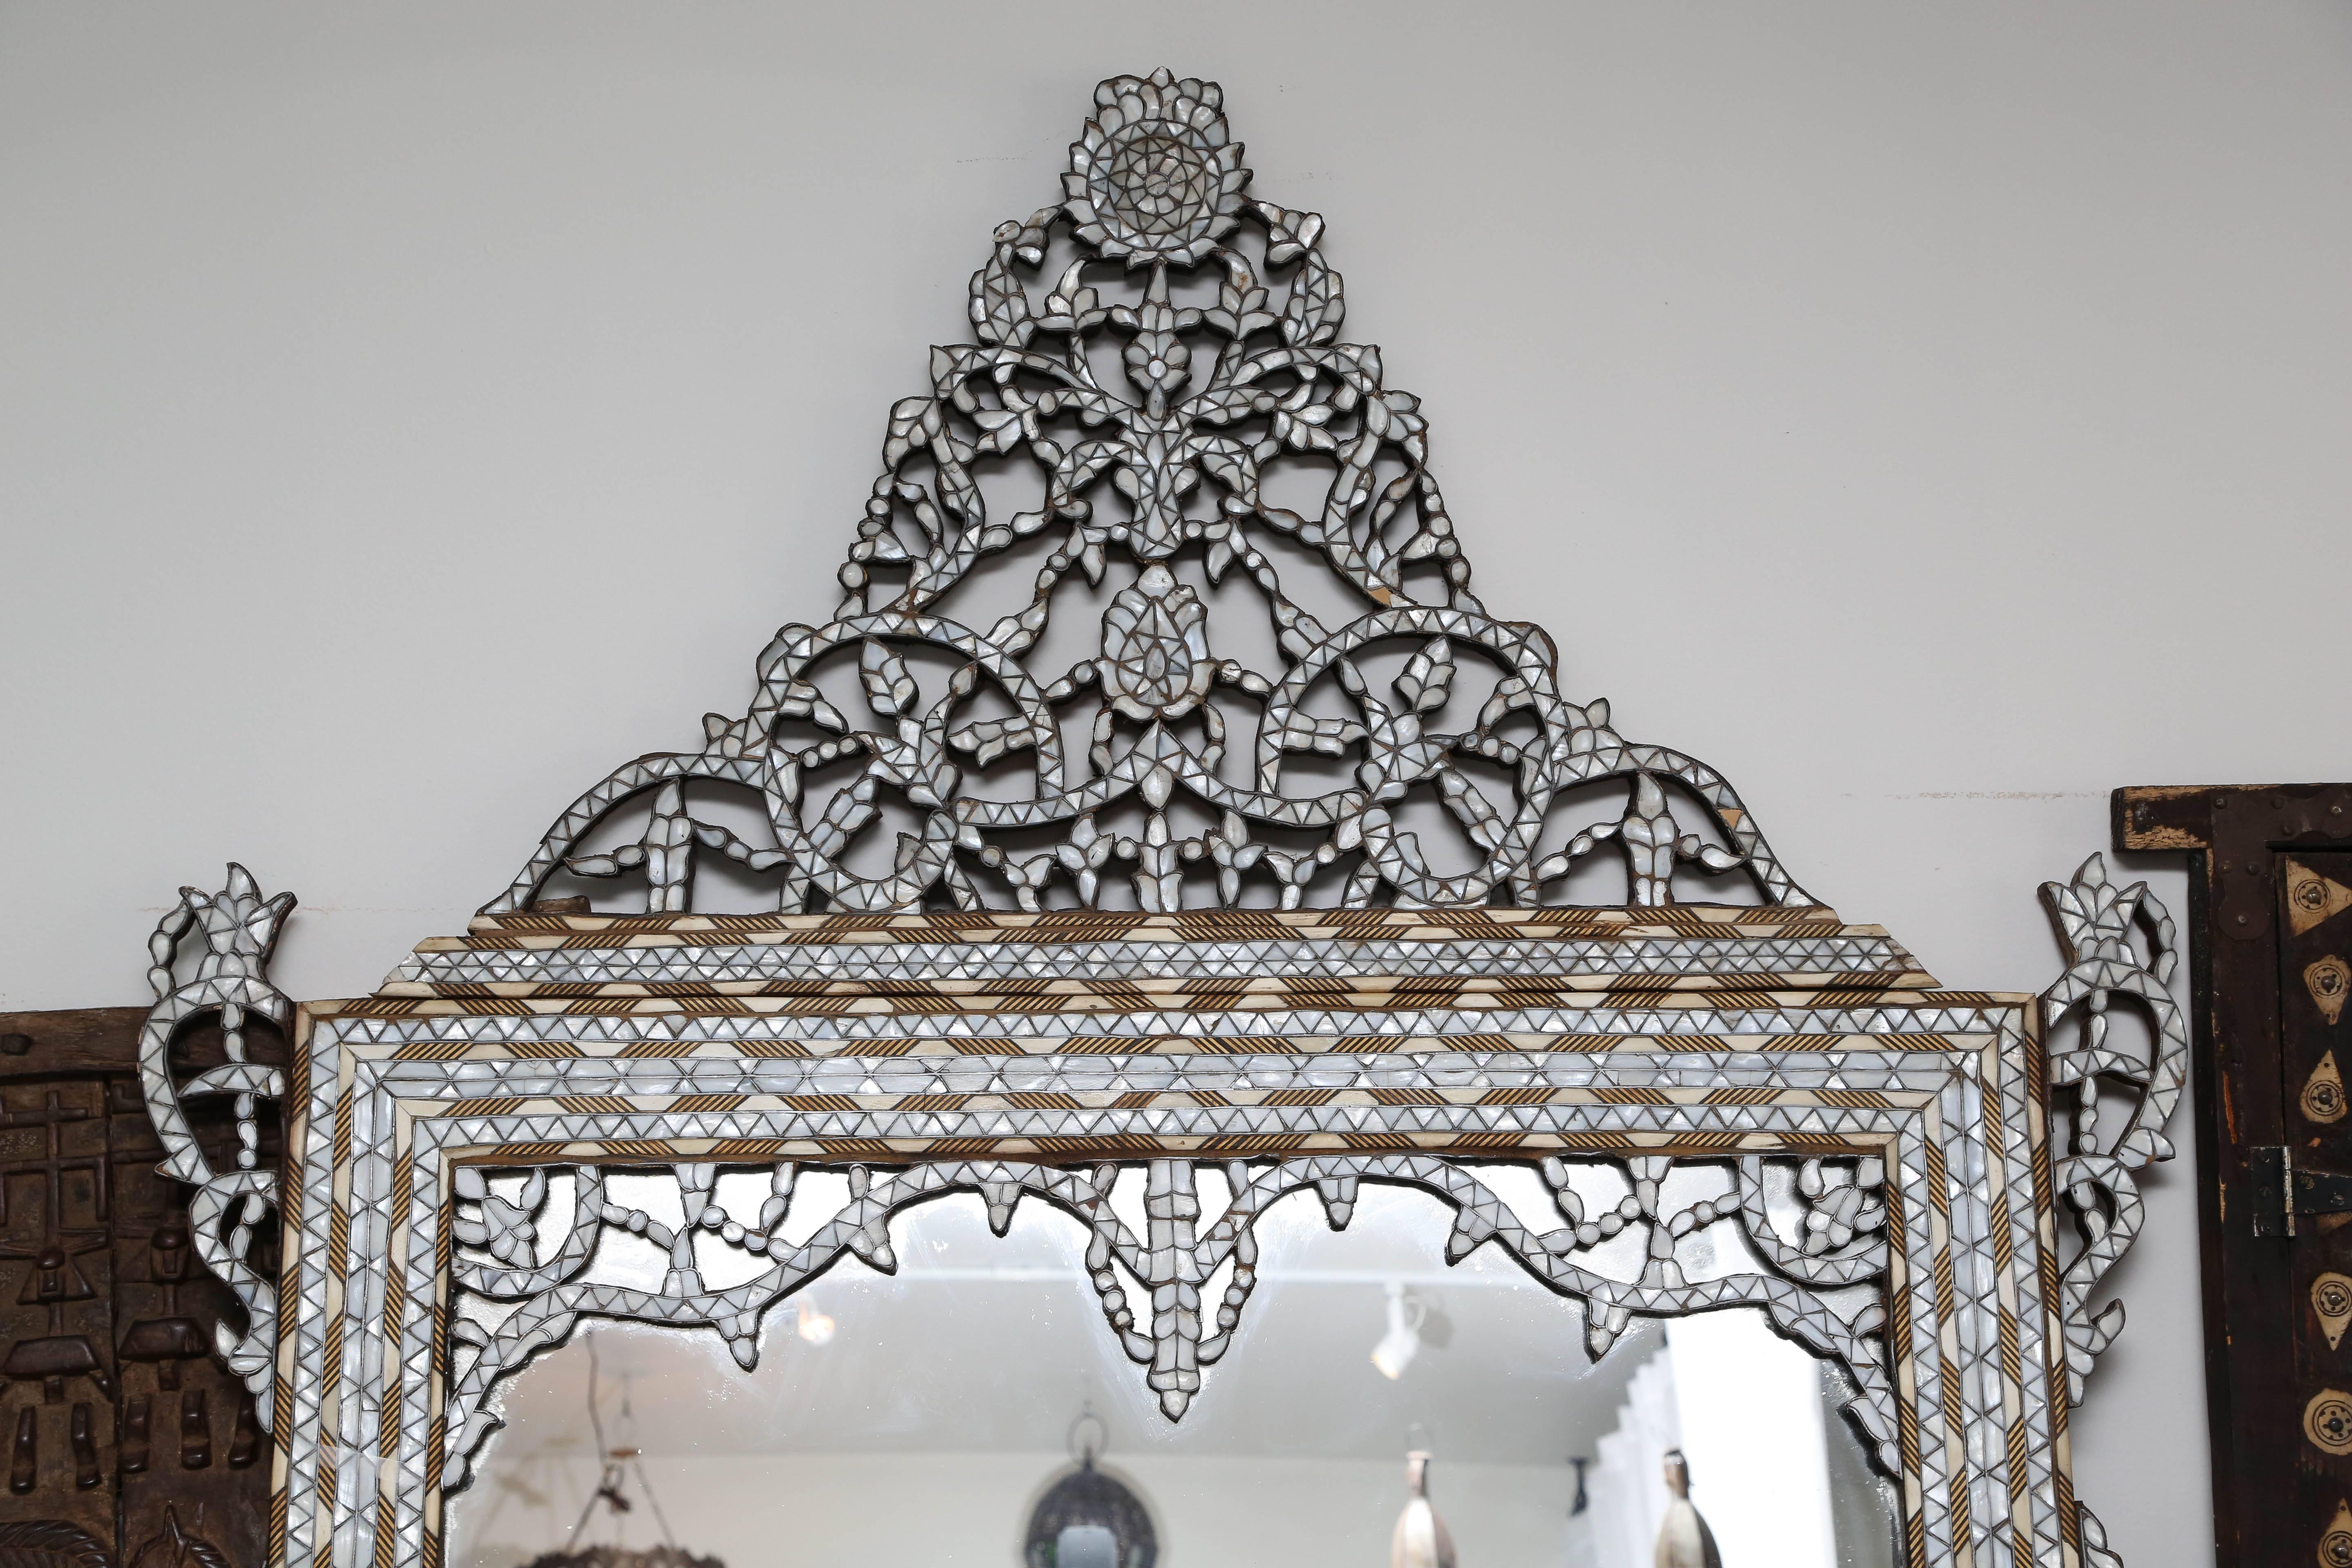 This antique handcrafted inlaid mirror is crafted from individuality cut pieces of mother-of-pearl and camel bone. The high bonnet top is geometric style design is detachable for easy transport.